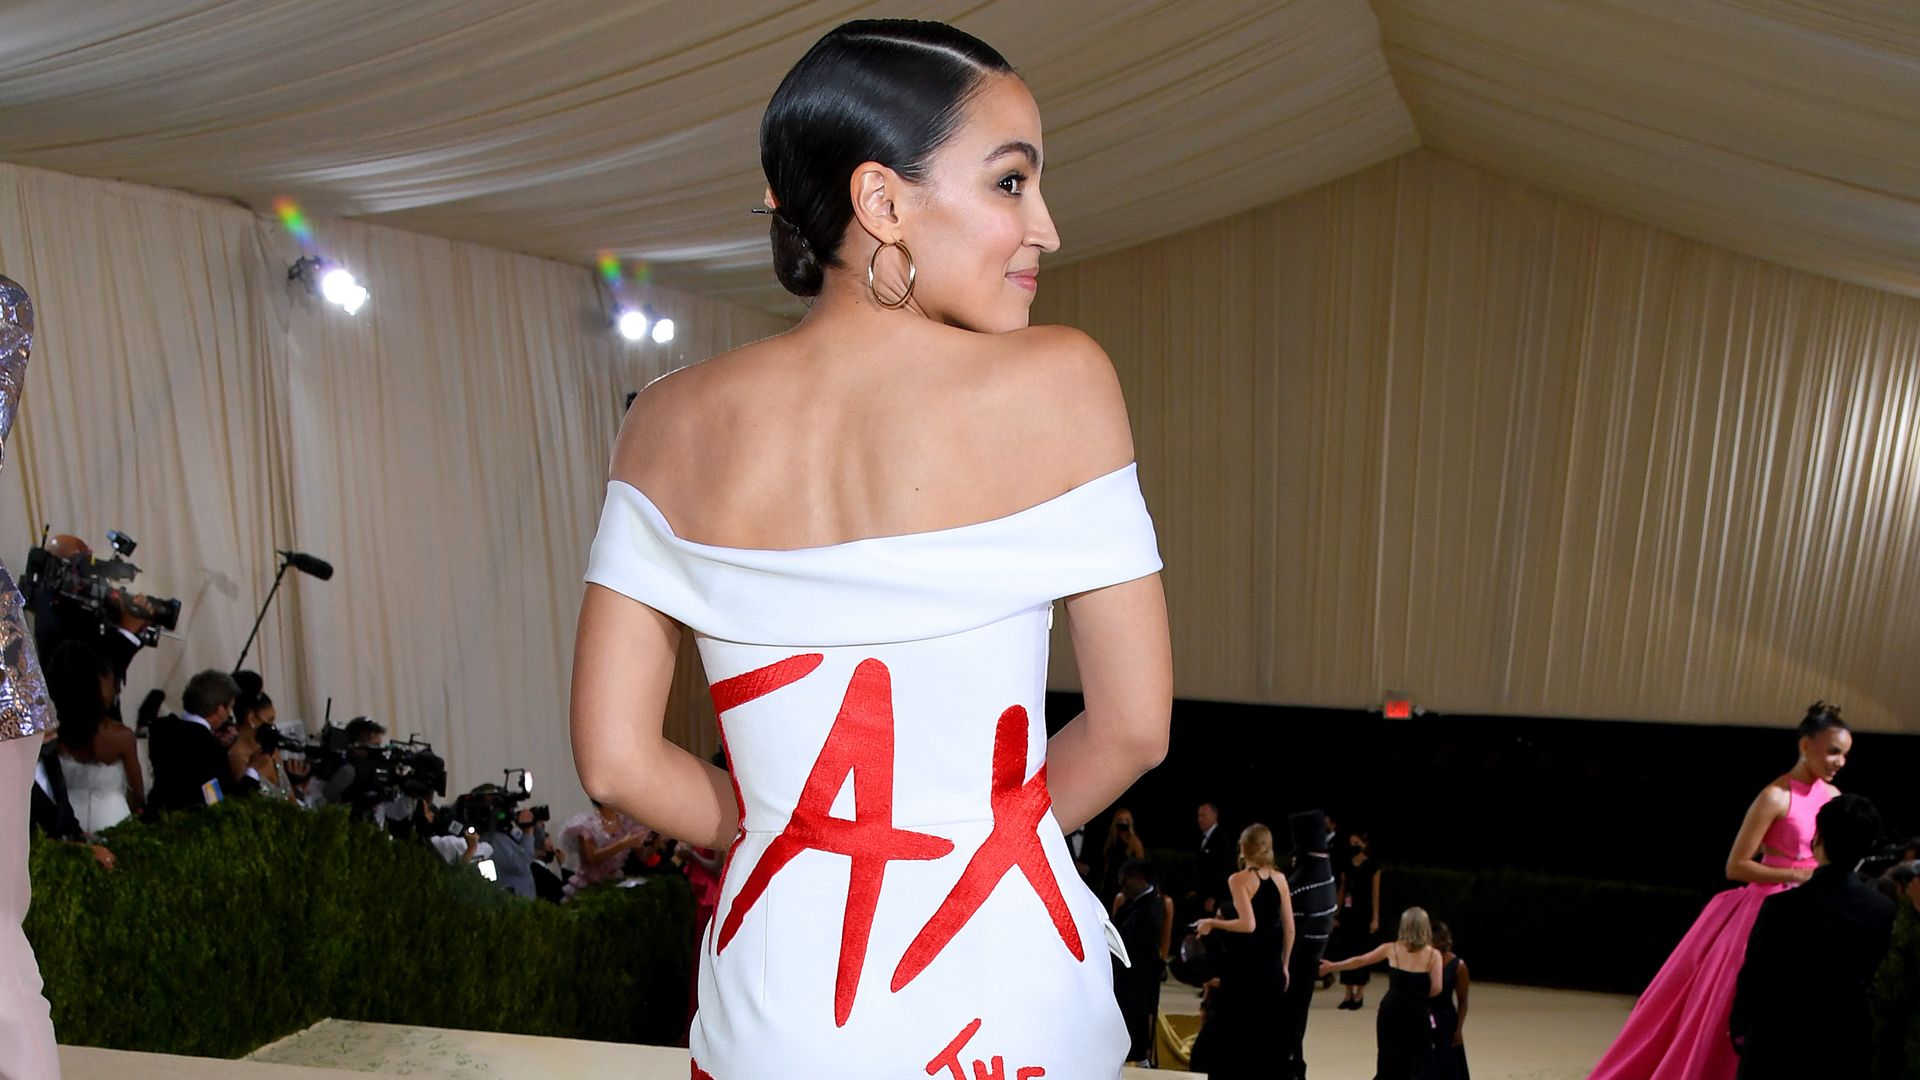 Alexandria Ocasio-Cortez attends The 2021 Met Gala Celebrating In America: A Lexicon Of Fashion at Metropolitan Museum of Art on September 13, 2021 in New York City.